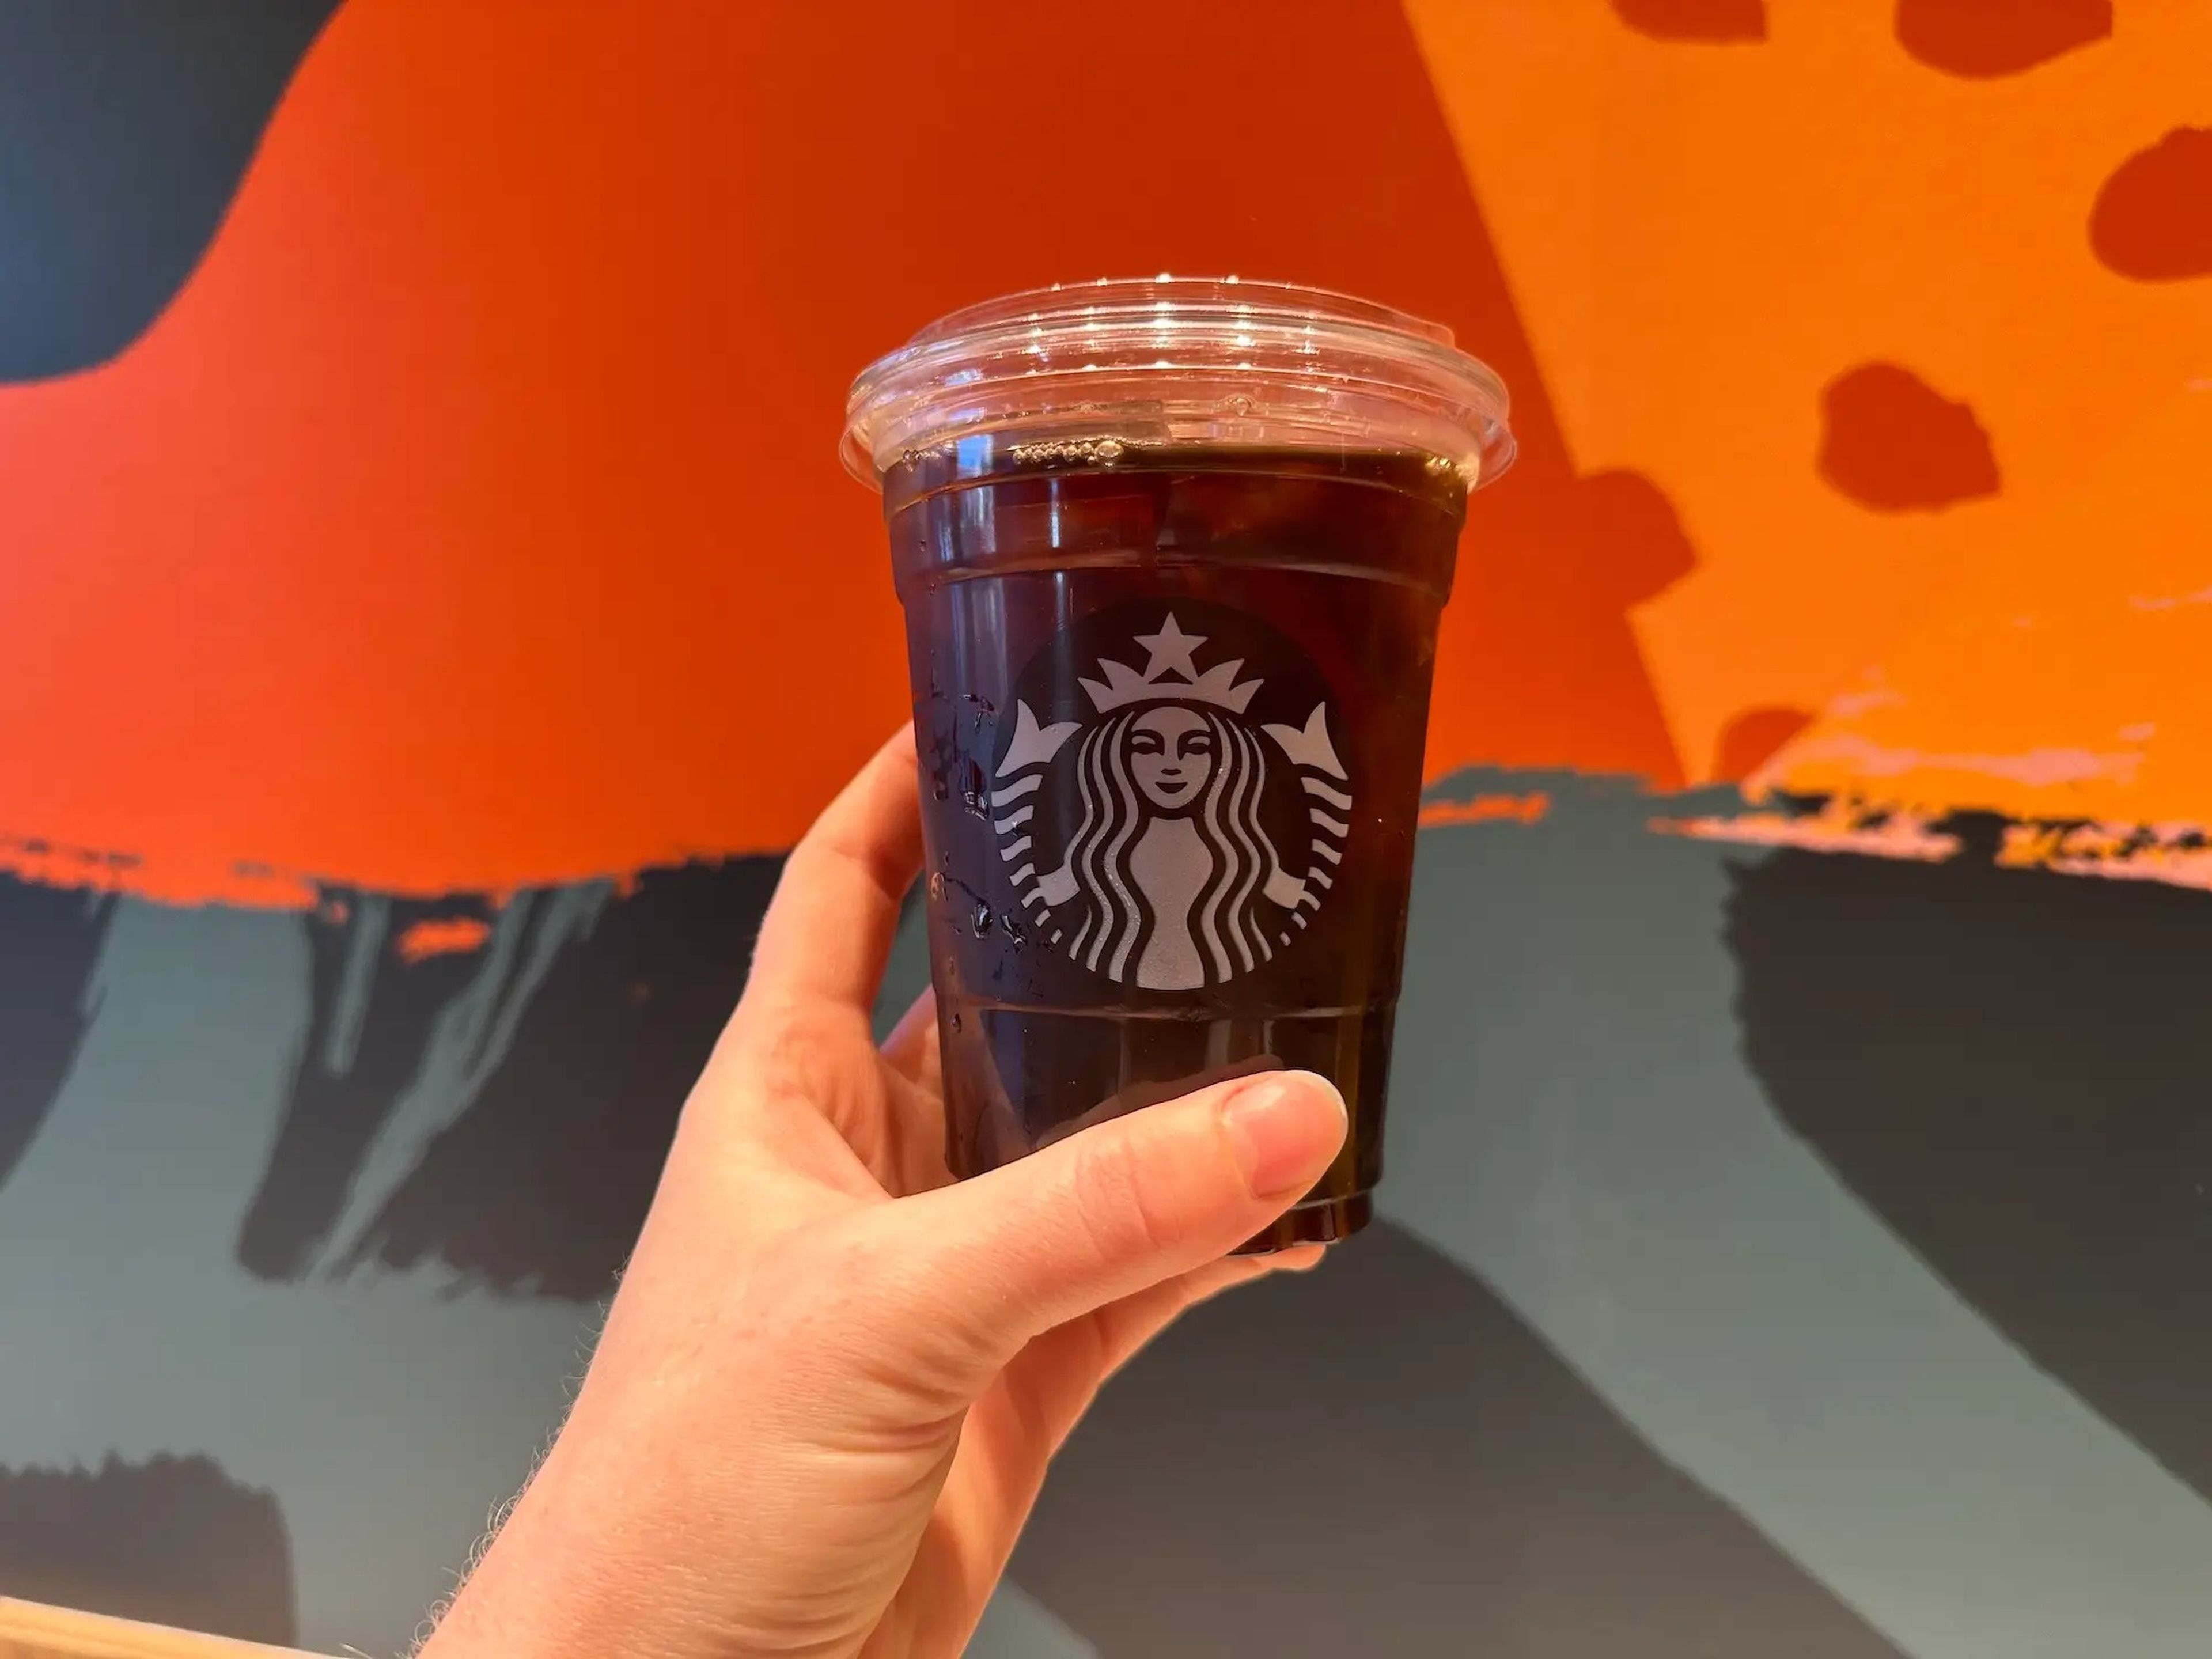 hand holding starbucks plastic cup with black iced coffee against a blue and orange patterned wall